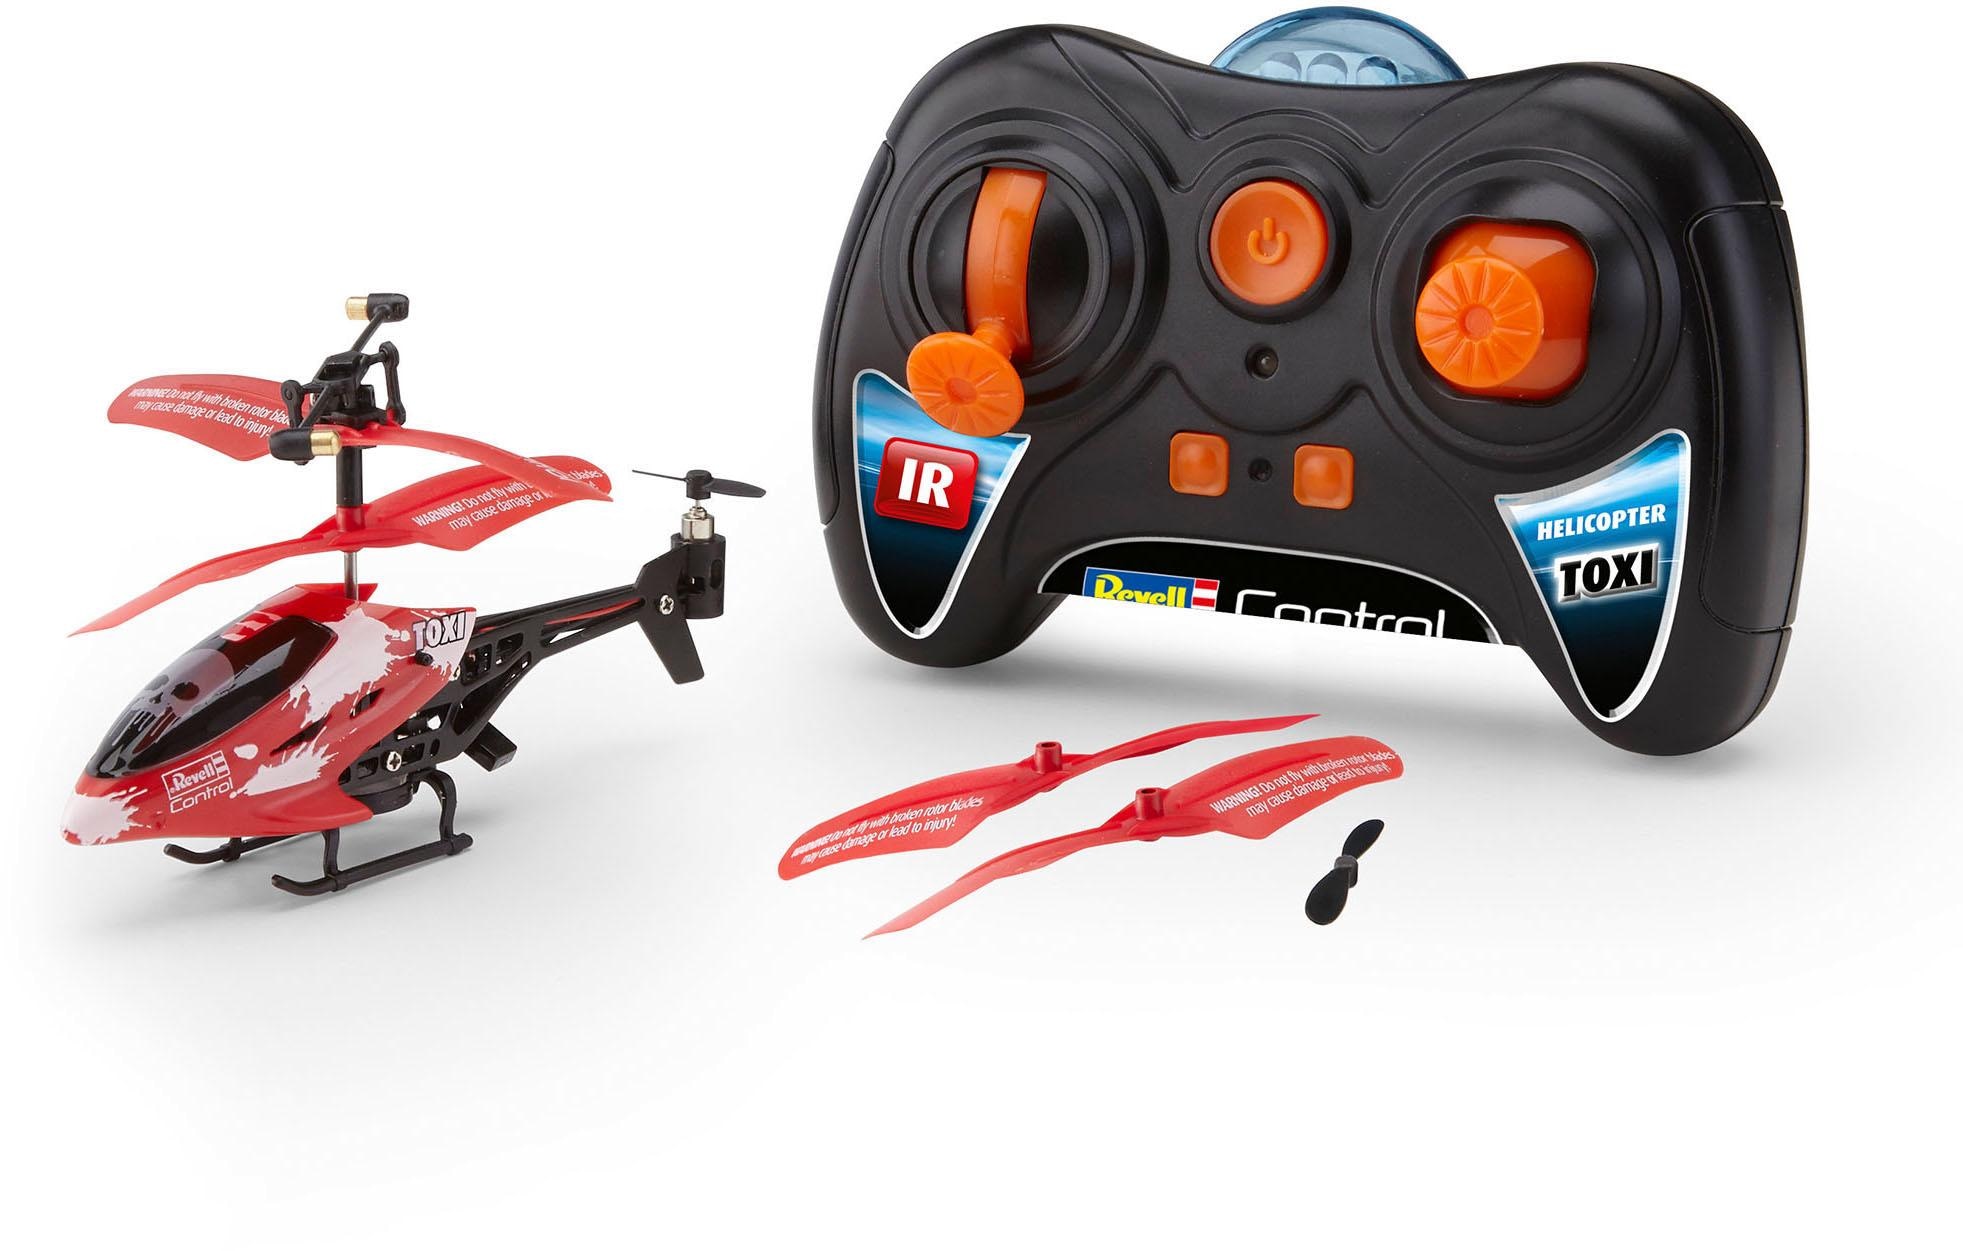 Revell® RC-Helikopter »Revell® control, Toxi«, mit LED-Beleuchtung